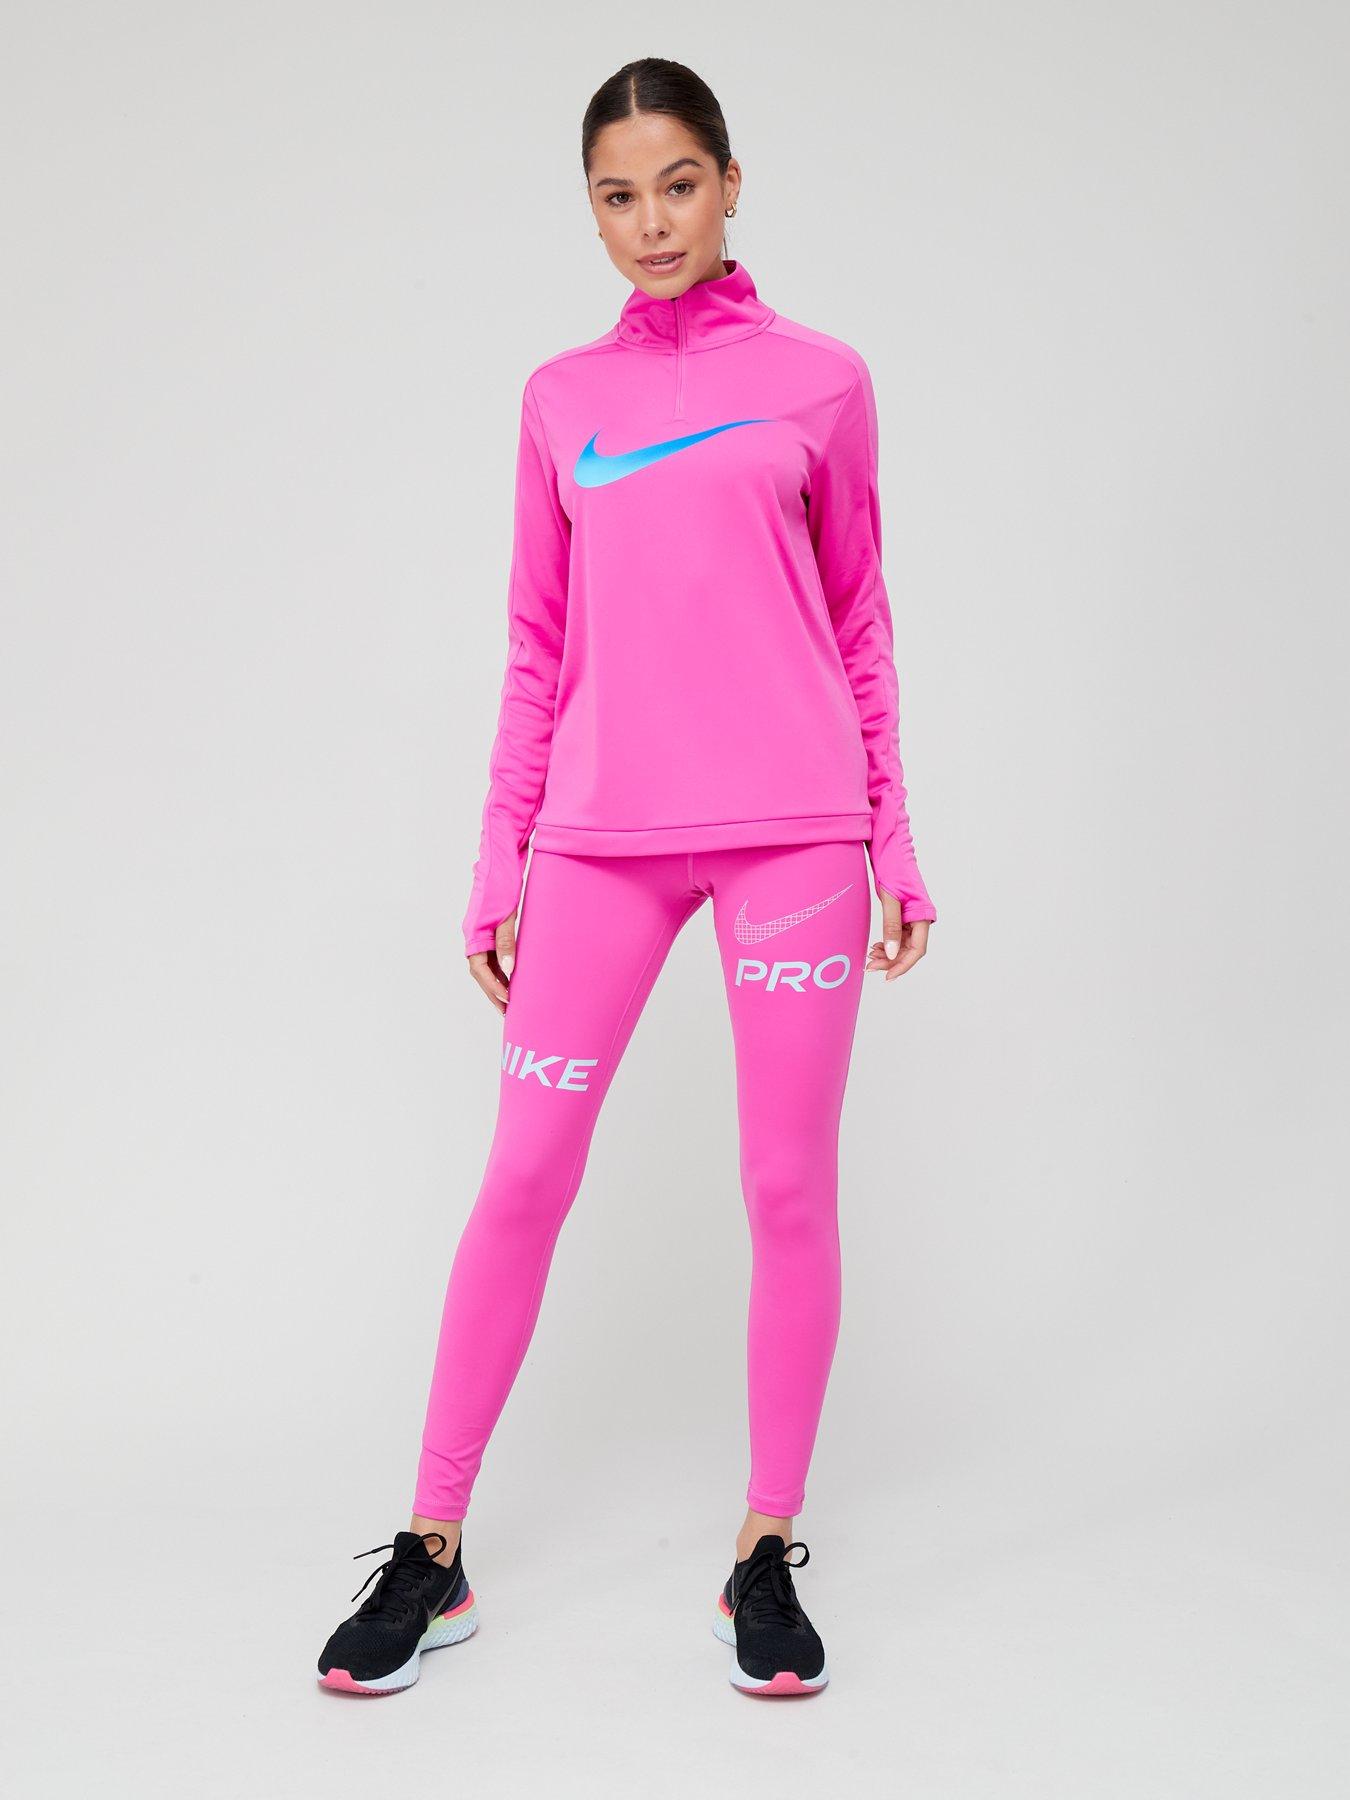 5 Pink Leggings From Nike for Every Workout . Nike BE